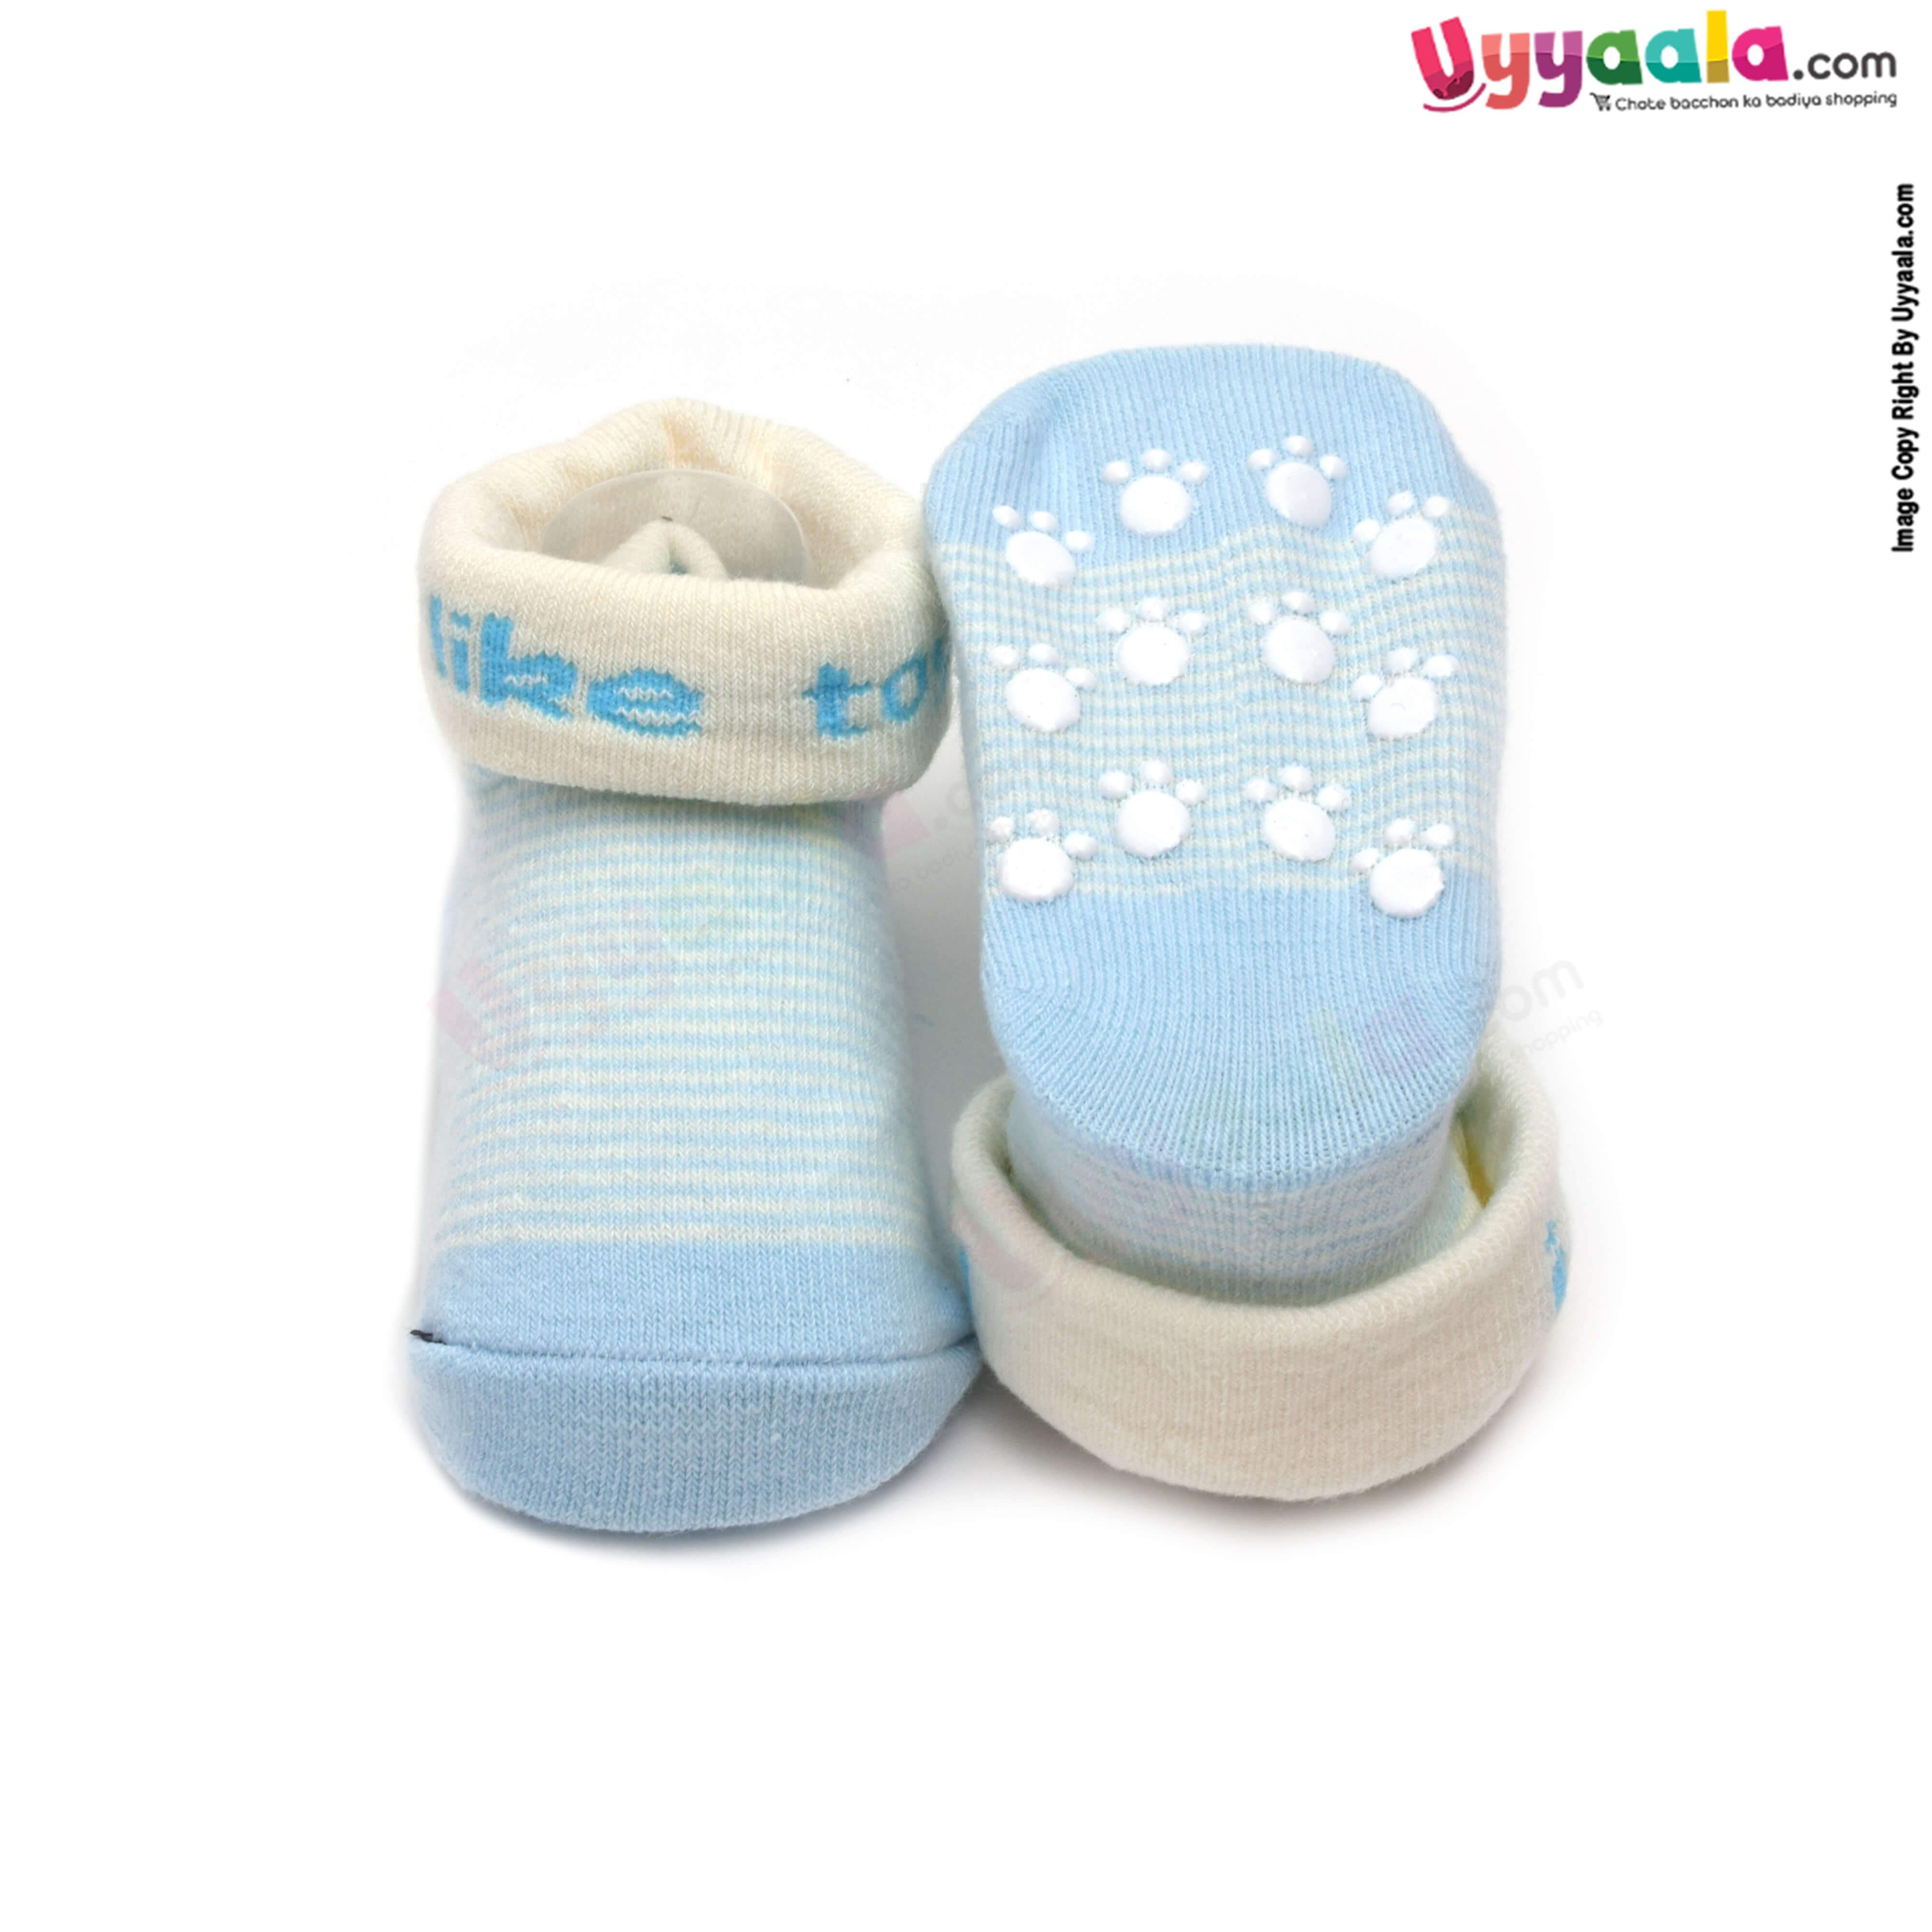 QBEIR Hosiery Cotton Baby Socks with Print, 0 to 12m Age